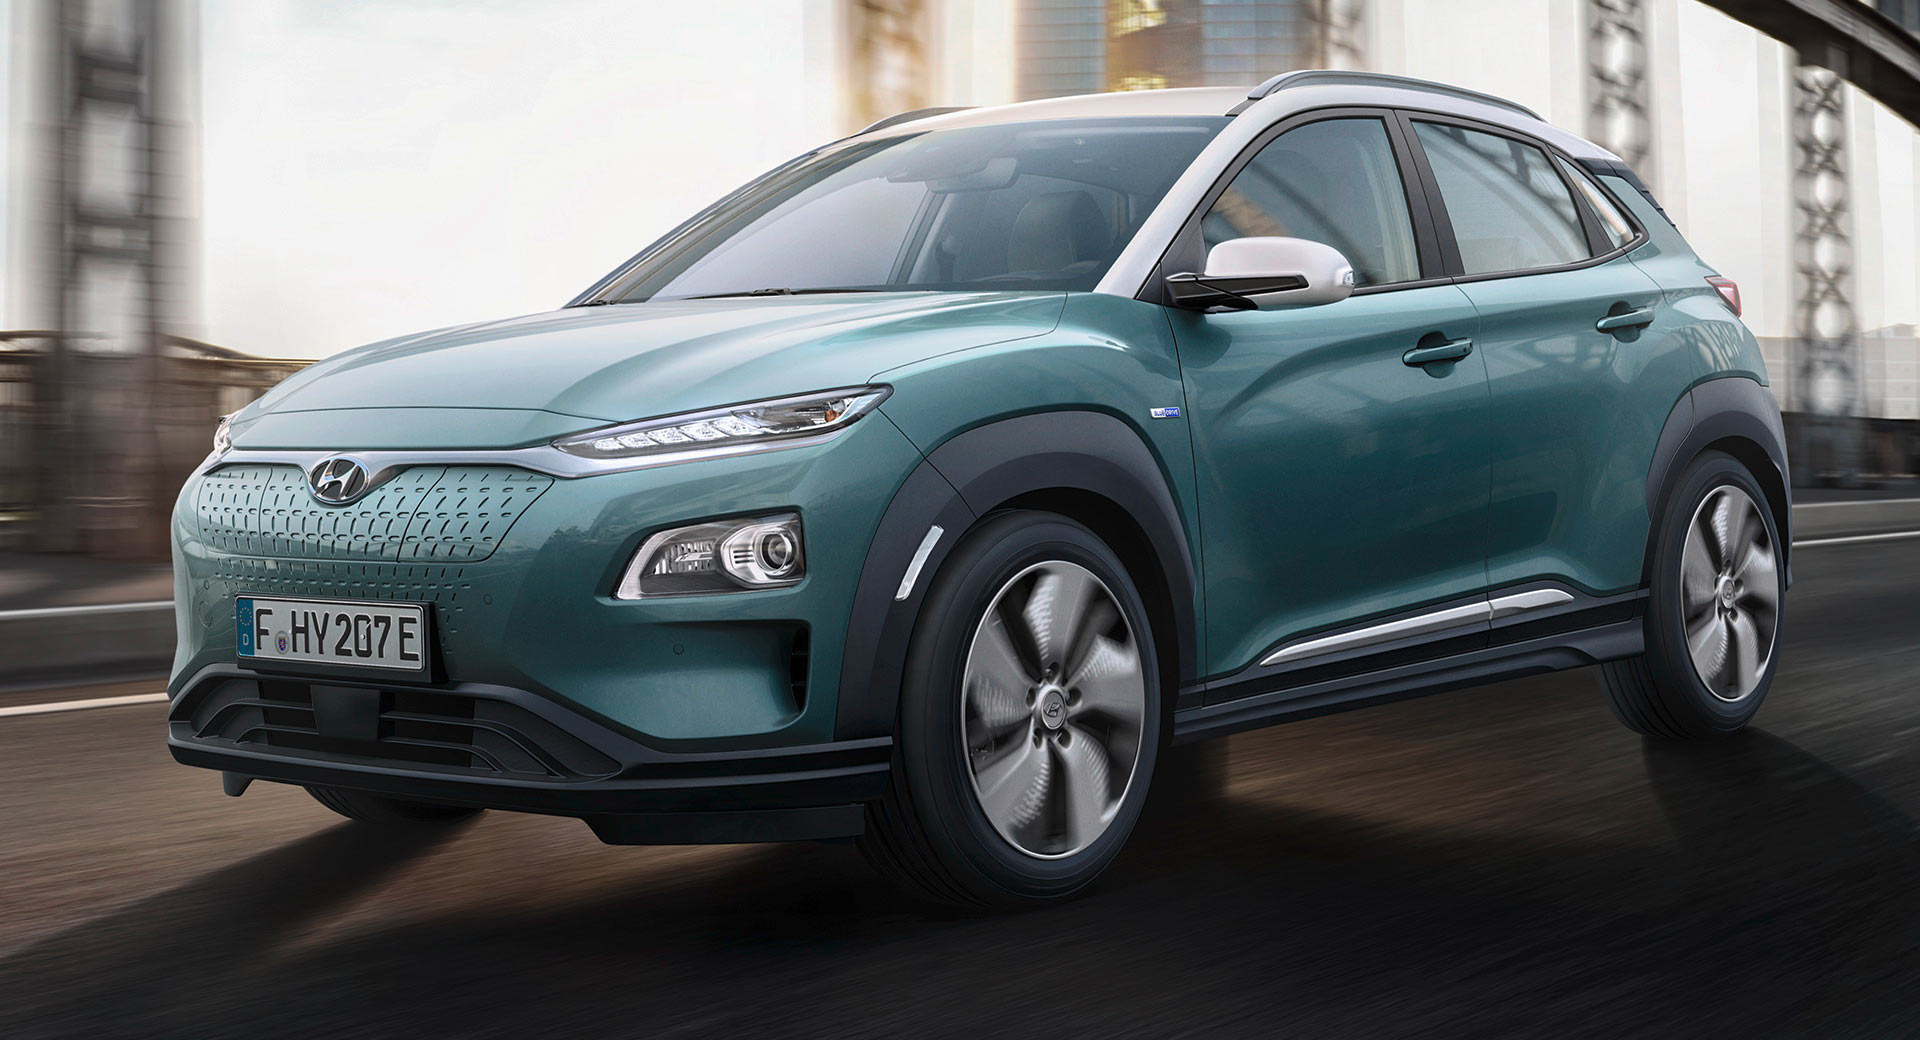 Hyundai Kona Electric Priced From £24,995 In The UK  Carscoops